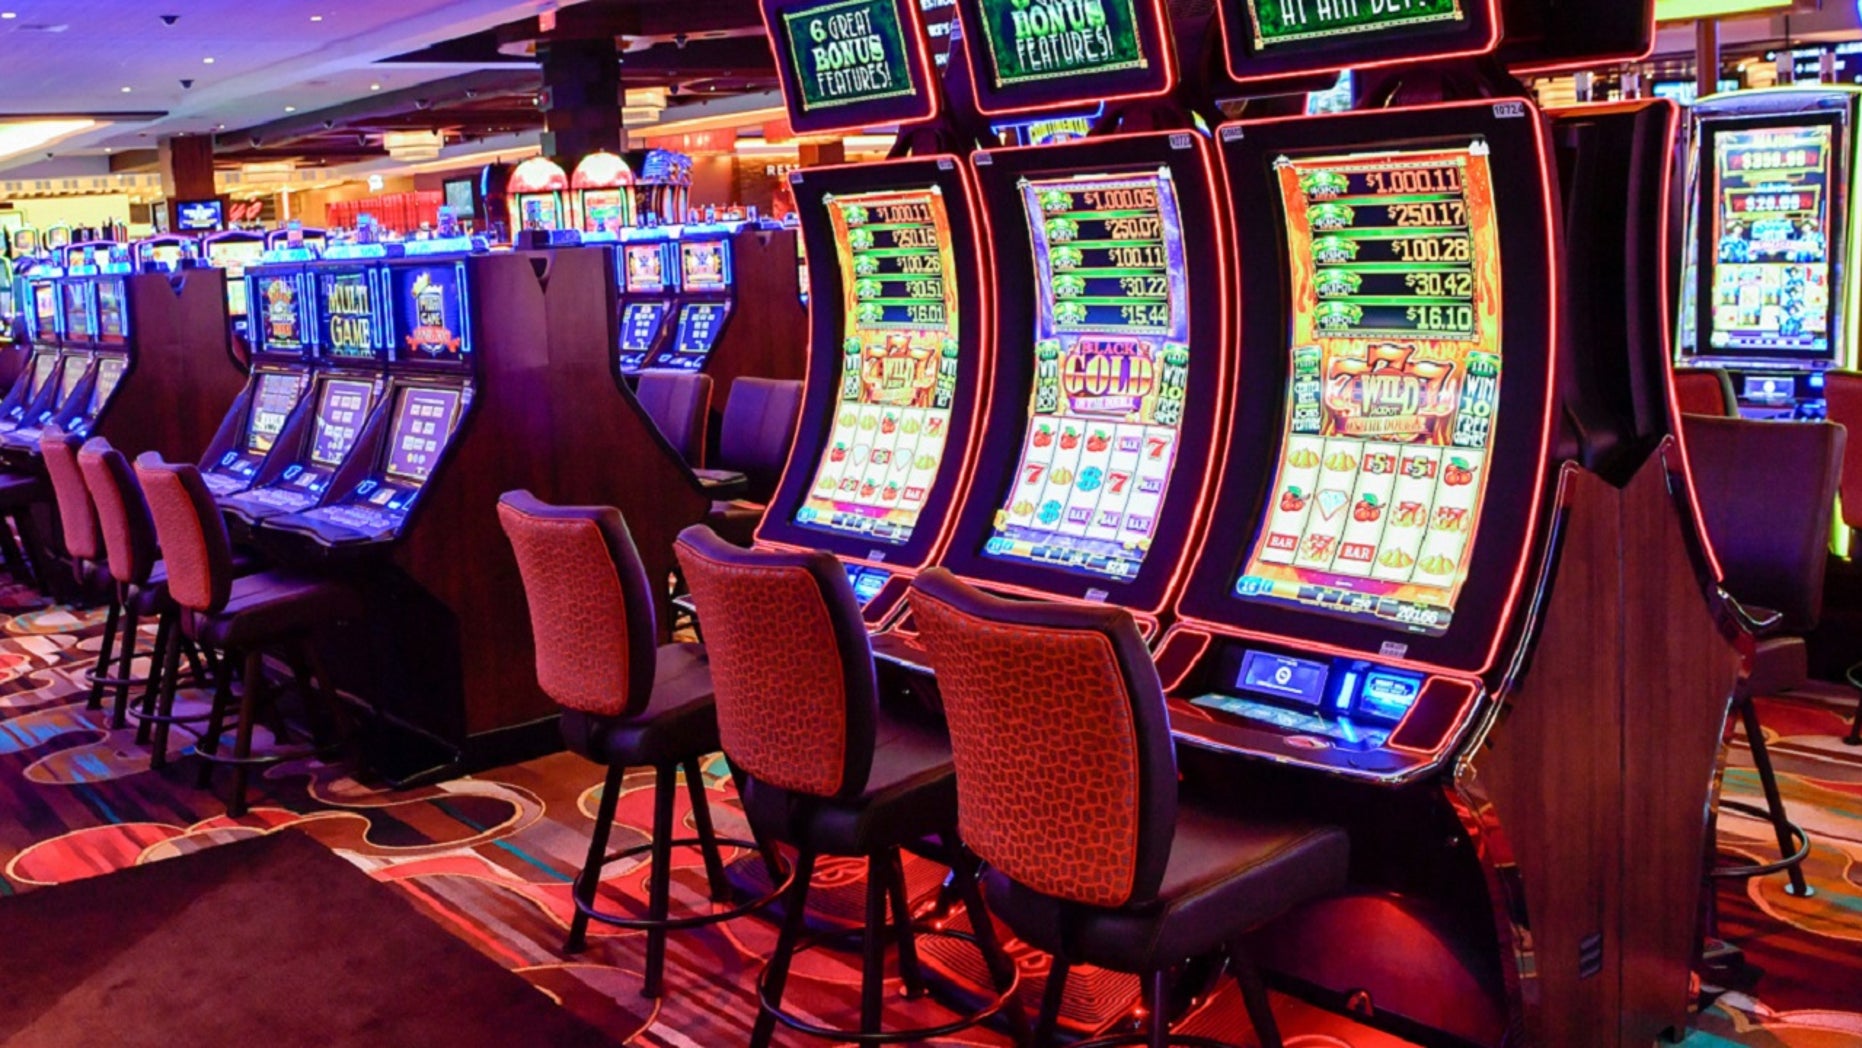 Man claims he hit G on slot machine and was only given ...